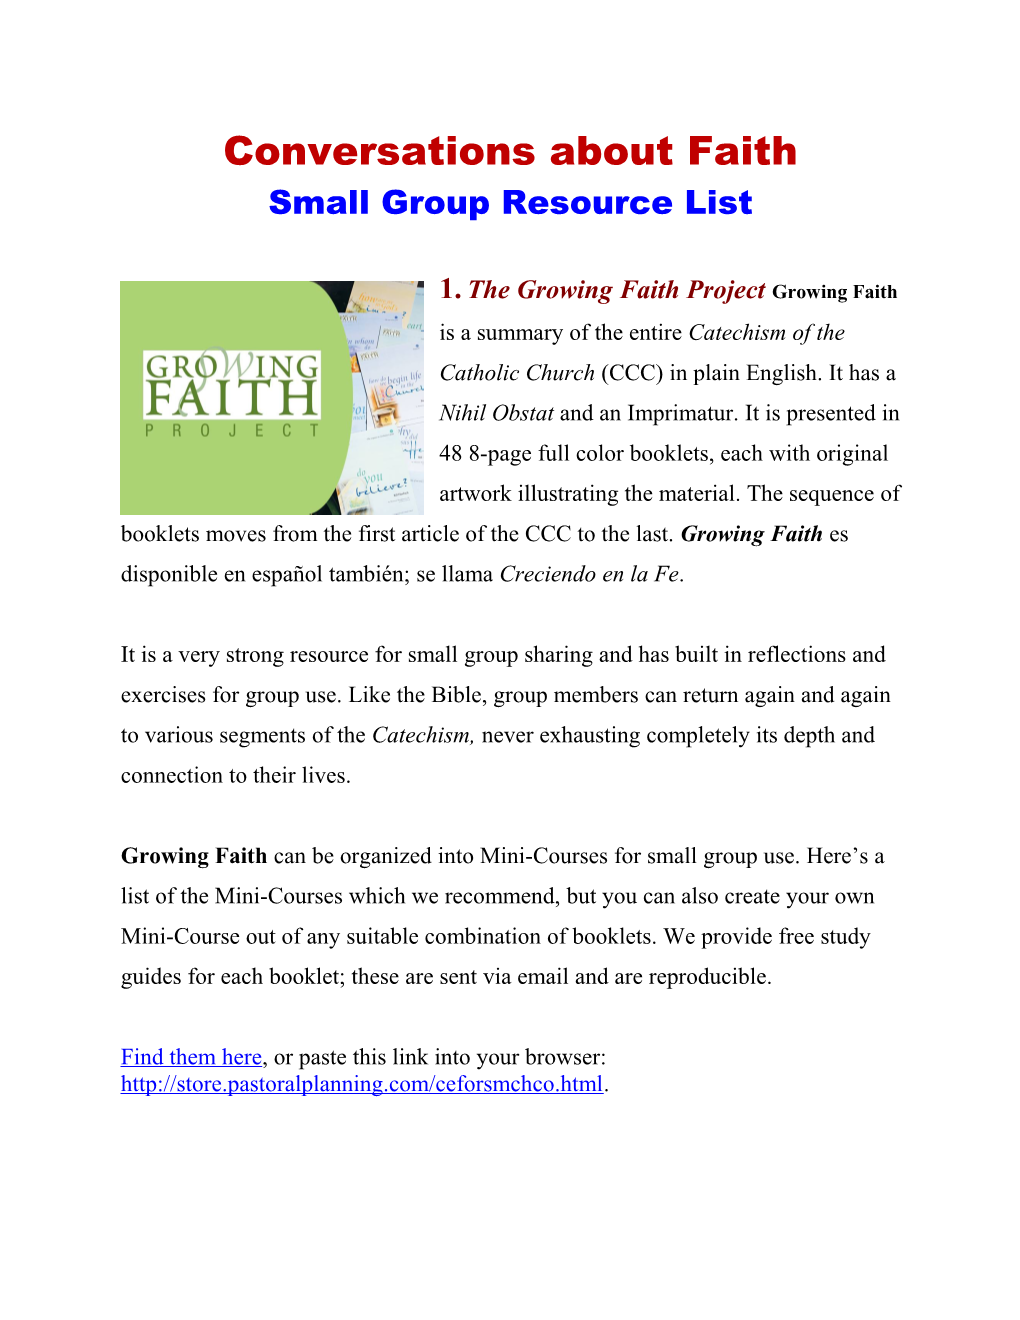 Small Group Resource List